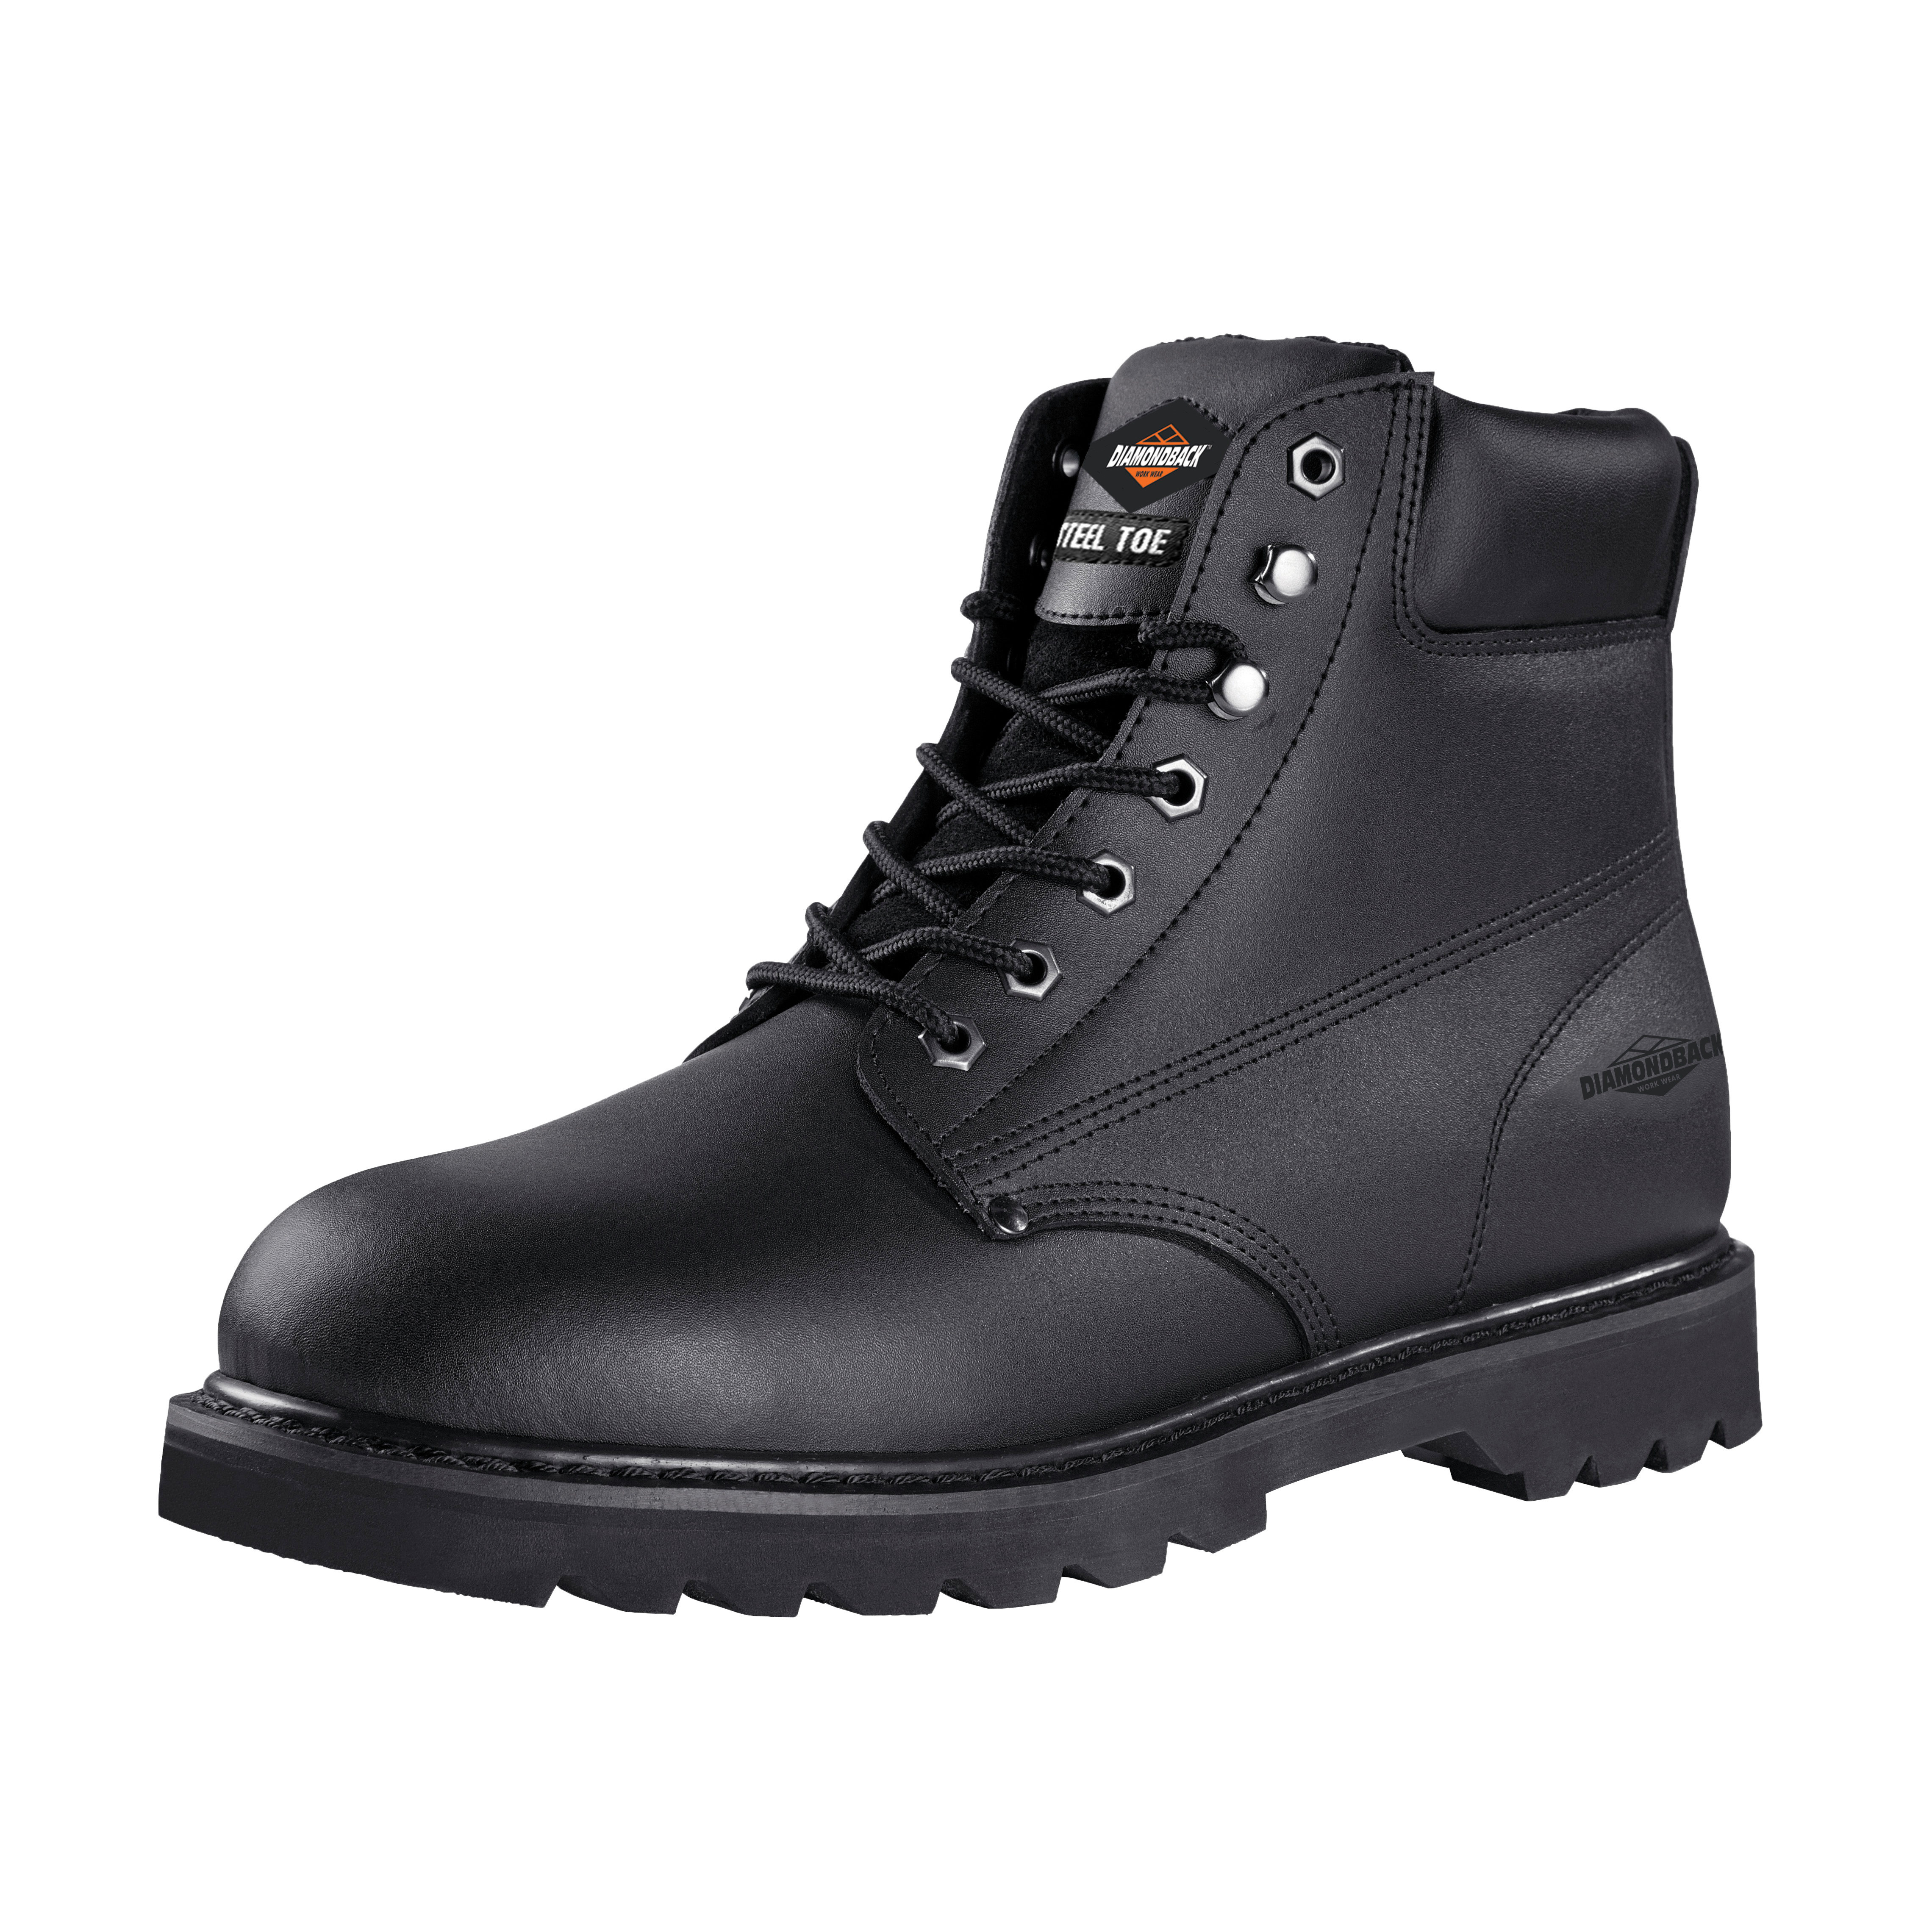 655SS-8.5 Work Boots, 8.5, Medium Shoe Last W, Black, Leather Upper, Lace-Up Boots Closure, With Lining